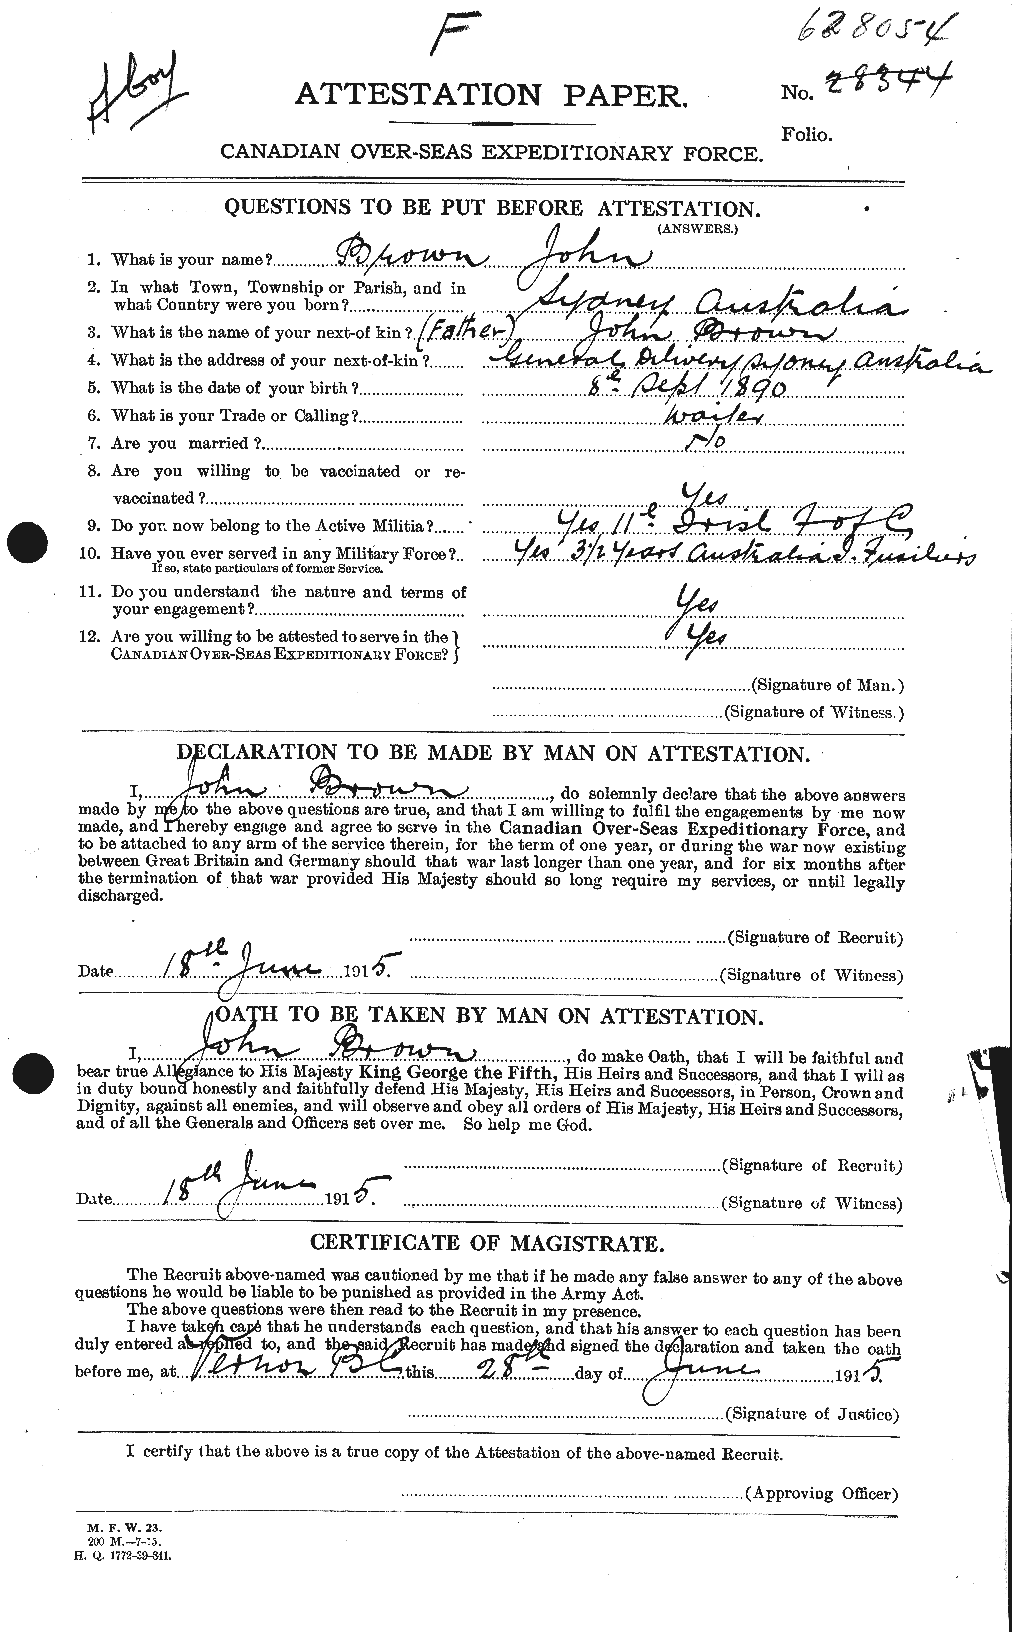 Personnel Records of the First World War - CEF 269632a